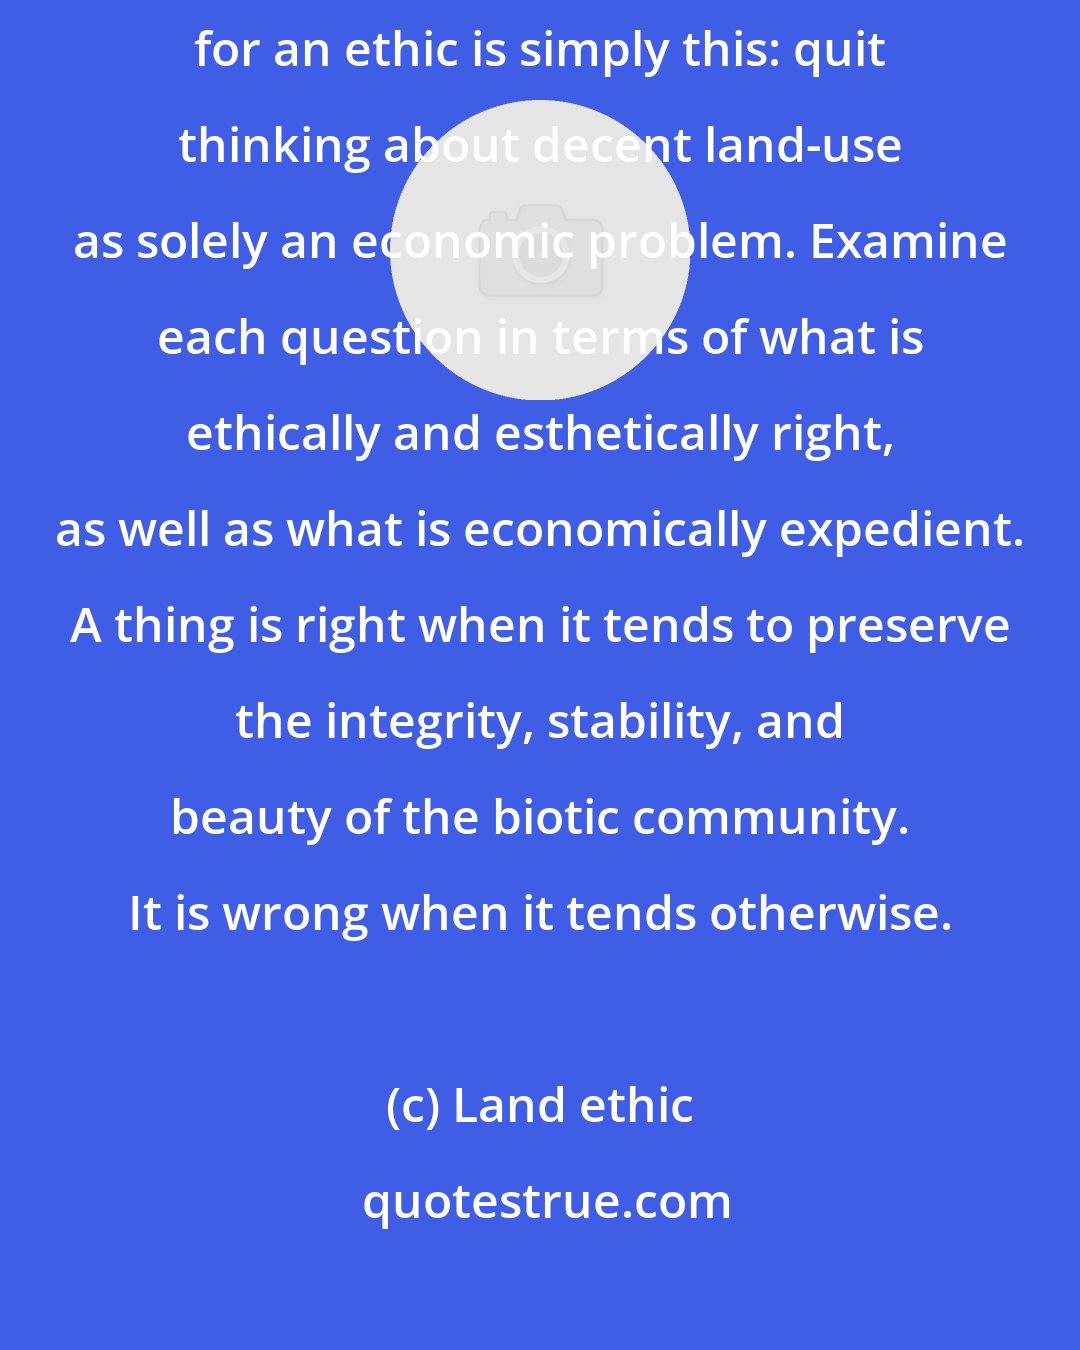 Land ethic: The 'key-log' which must be moved to release the evolutionary process for an ethic is simply this: quit thinking about decent land-use as solely an economic problem. Examine each question in terms of what is ethically and esthetically right, as well as what is economically expedient. A thing is right when it tends to preserve the integrity, stability, and beauty of the biotic community. It is wrong when it tends otherwise.